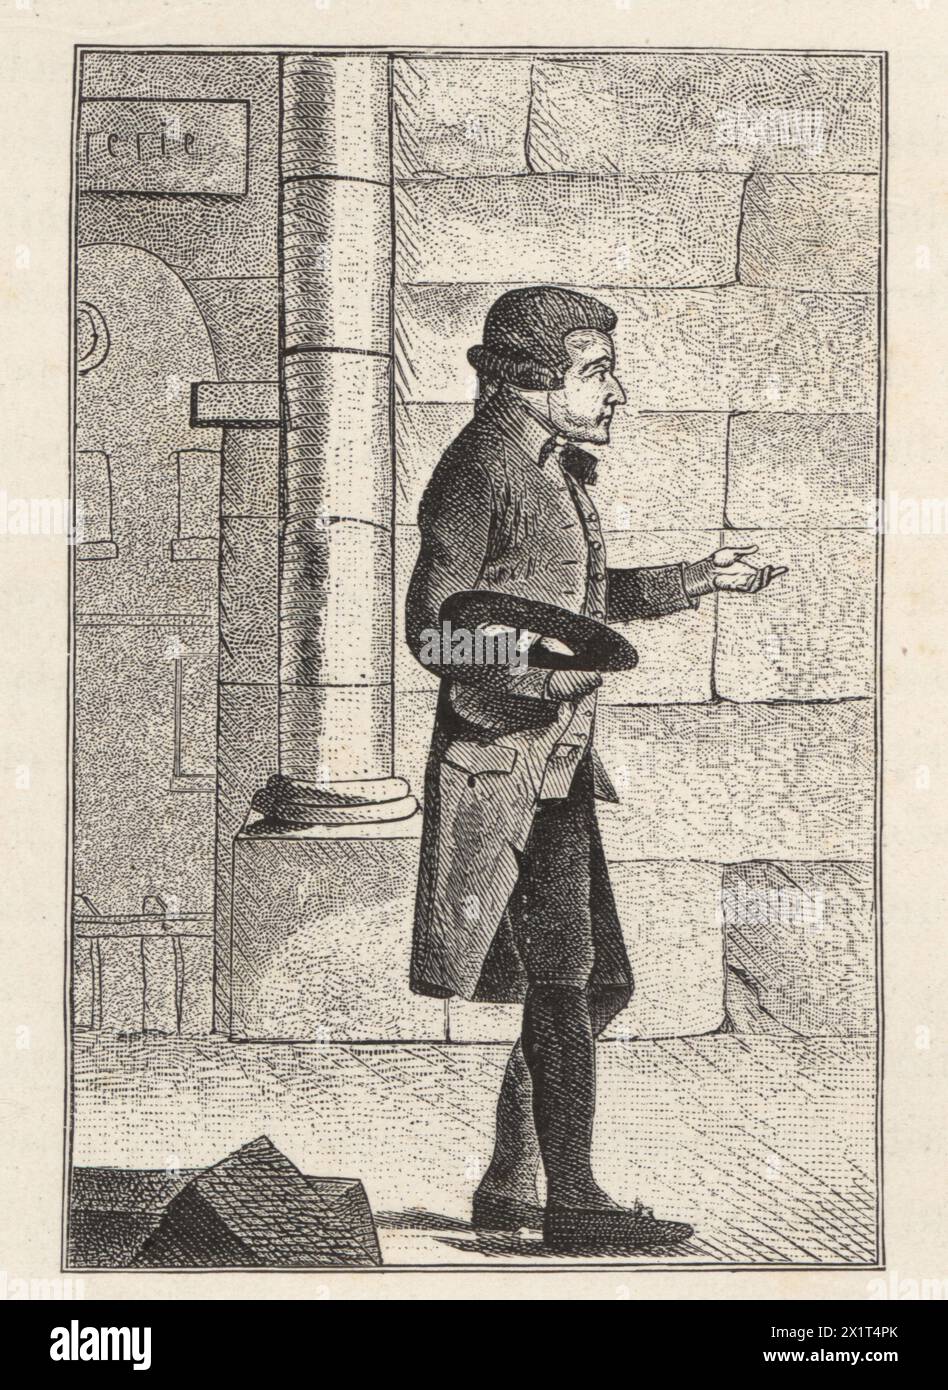 Caricature of a French landlord complaining about his tenants, 1797. 'The bad ones torment me, the good ones ruin me.' Le Rentier: Les mechants me tourmentent, les bons me ruinent. Illustration from Paul Lacroix's Directoire, Consulat et Empire, (Directory, Consulate and Empire), Paris, 1884. Stock Photo